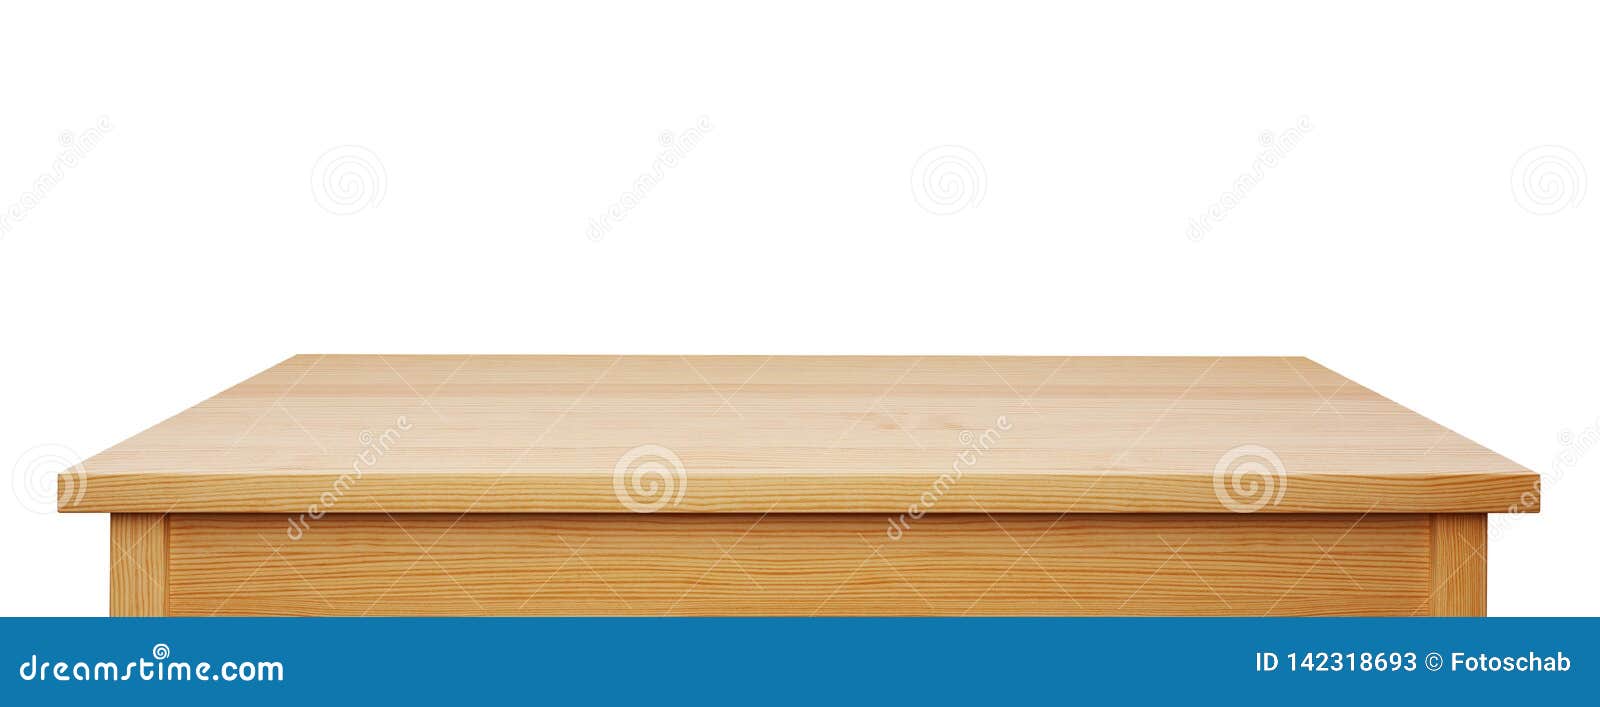 pine wood tabletop  on white background, 3d rendering